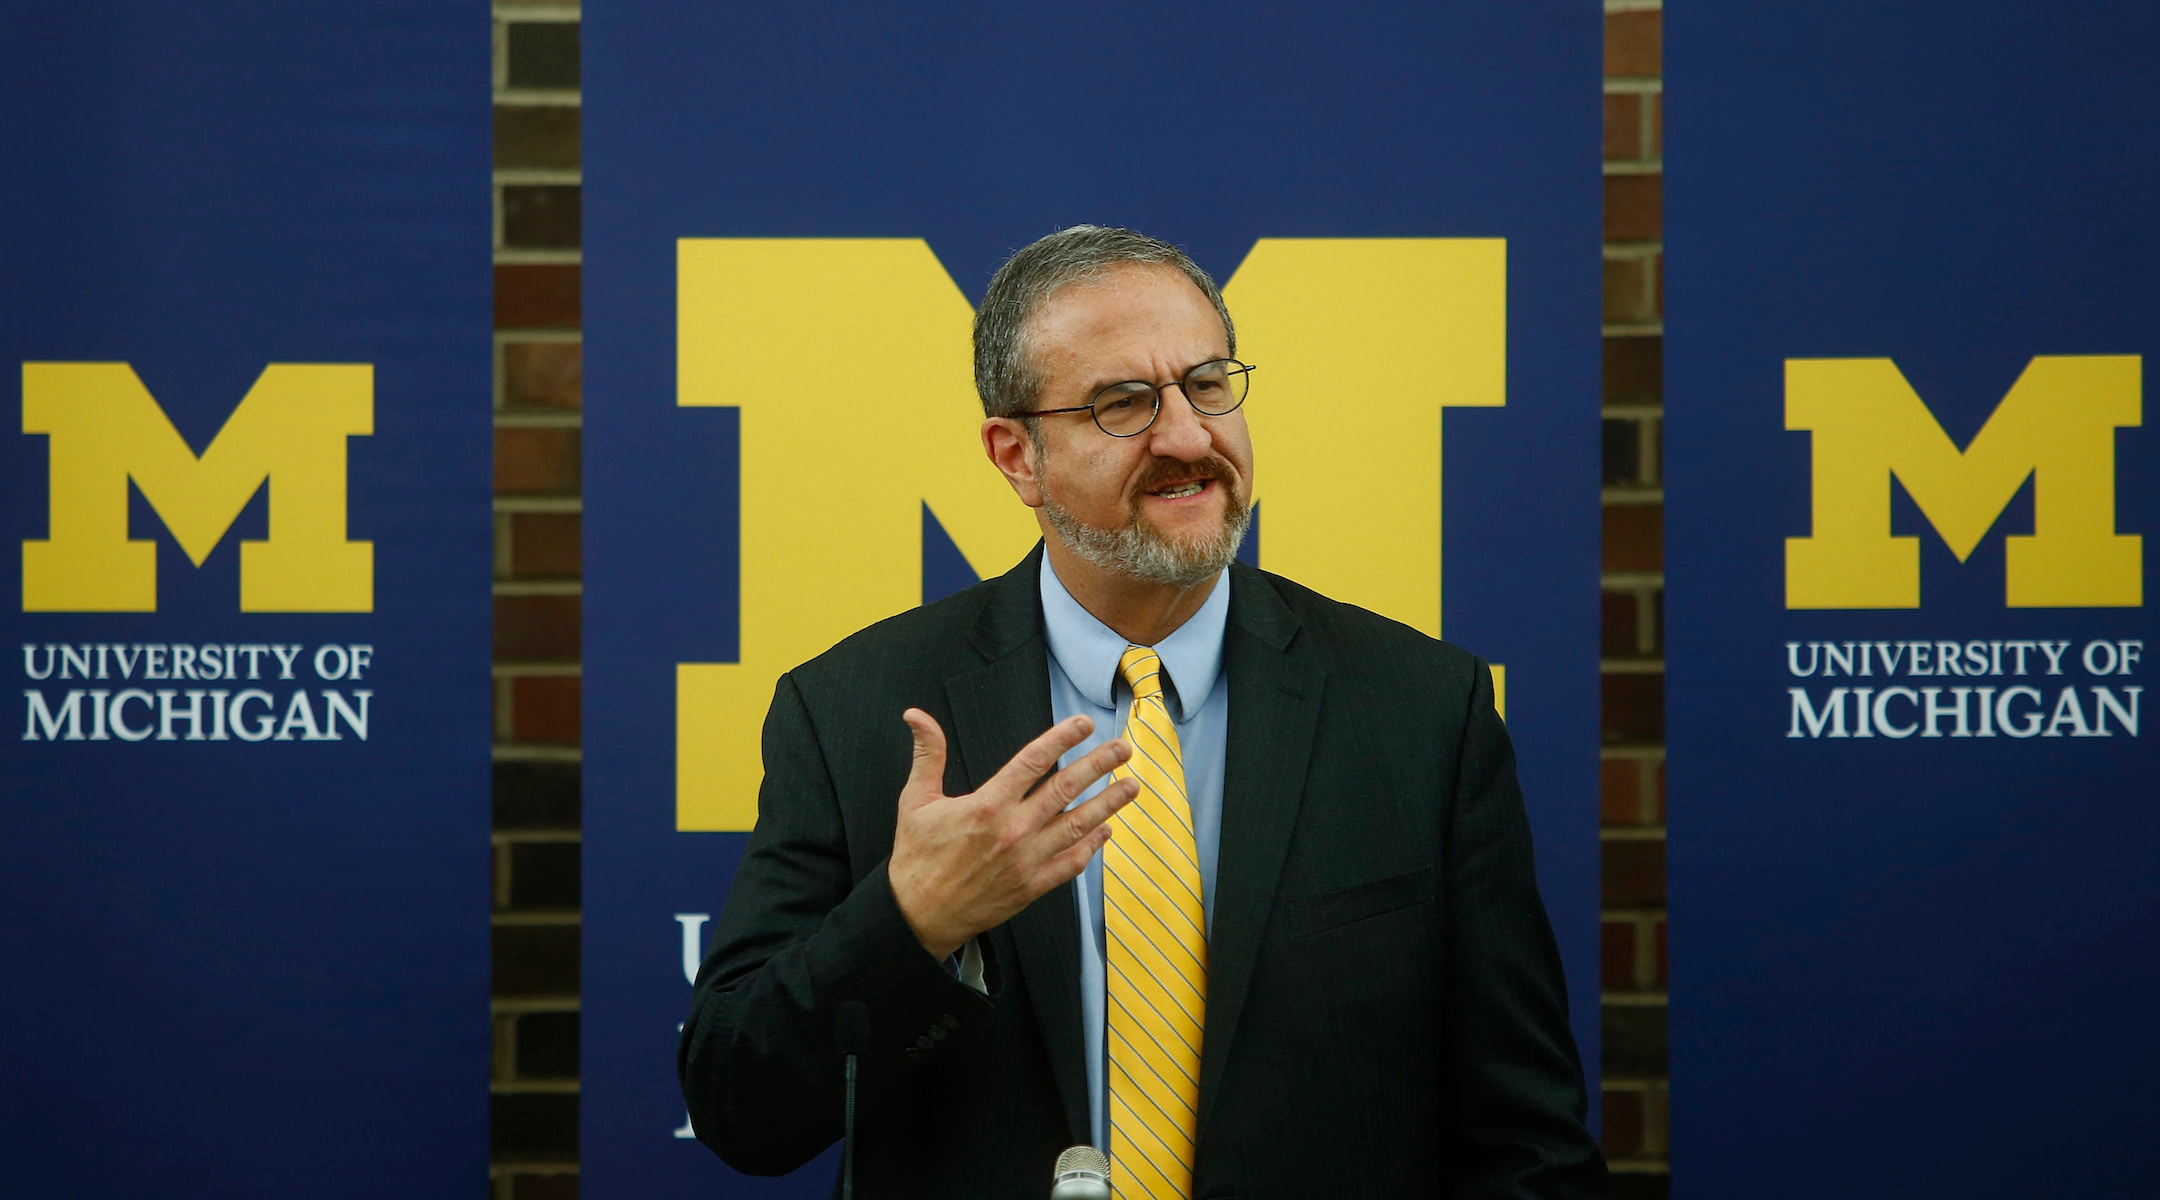 Knishes played a role in unsavory affair between former University of Michigan president and employee